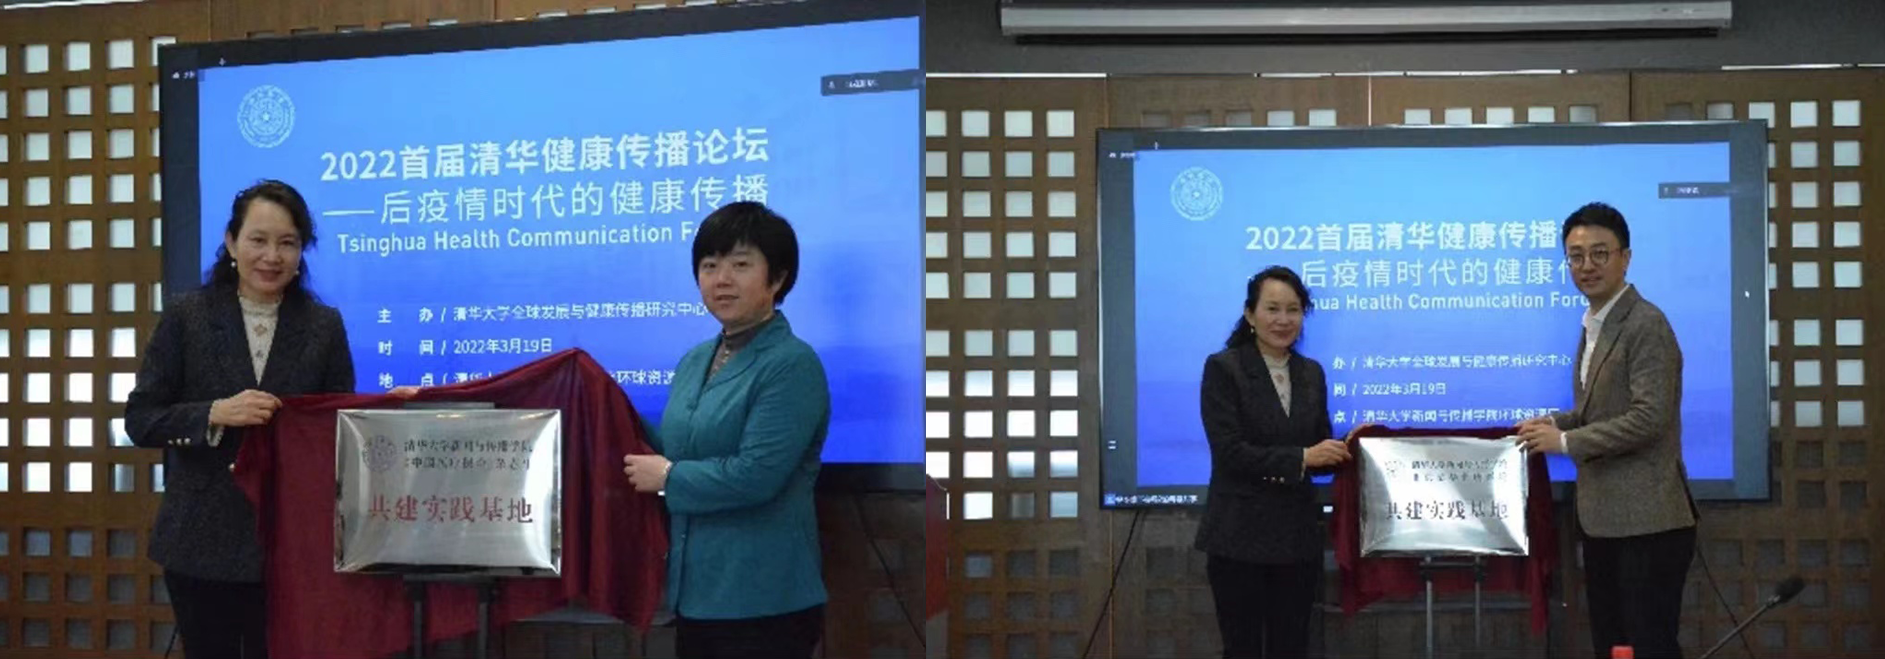 ></center></p><p>The Ceremony of Awarding</p><p>After the award ceremony, eight scholars gave speeches, sharing their recent research and reflections based on four perspectives--